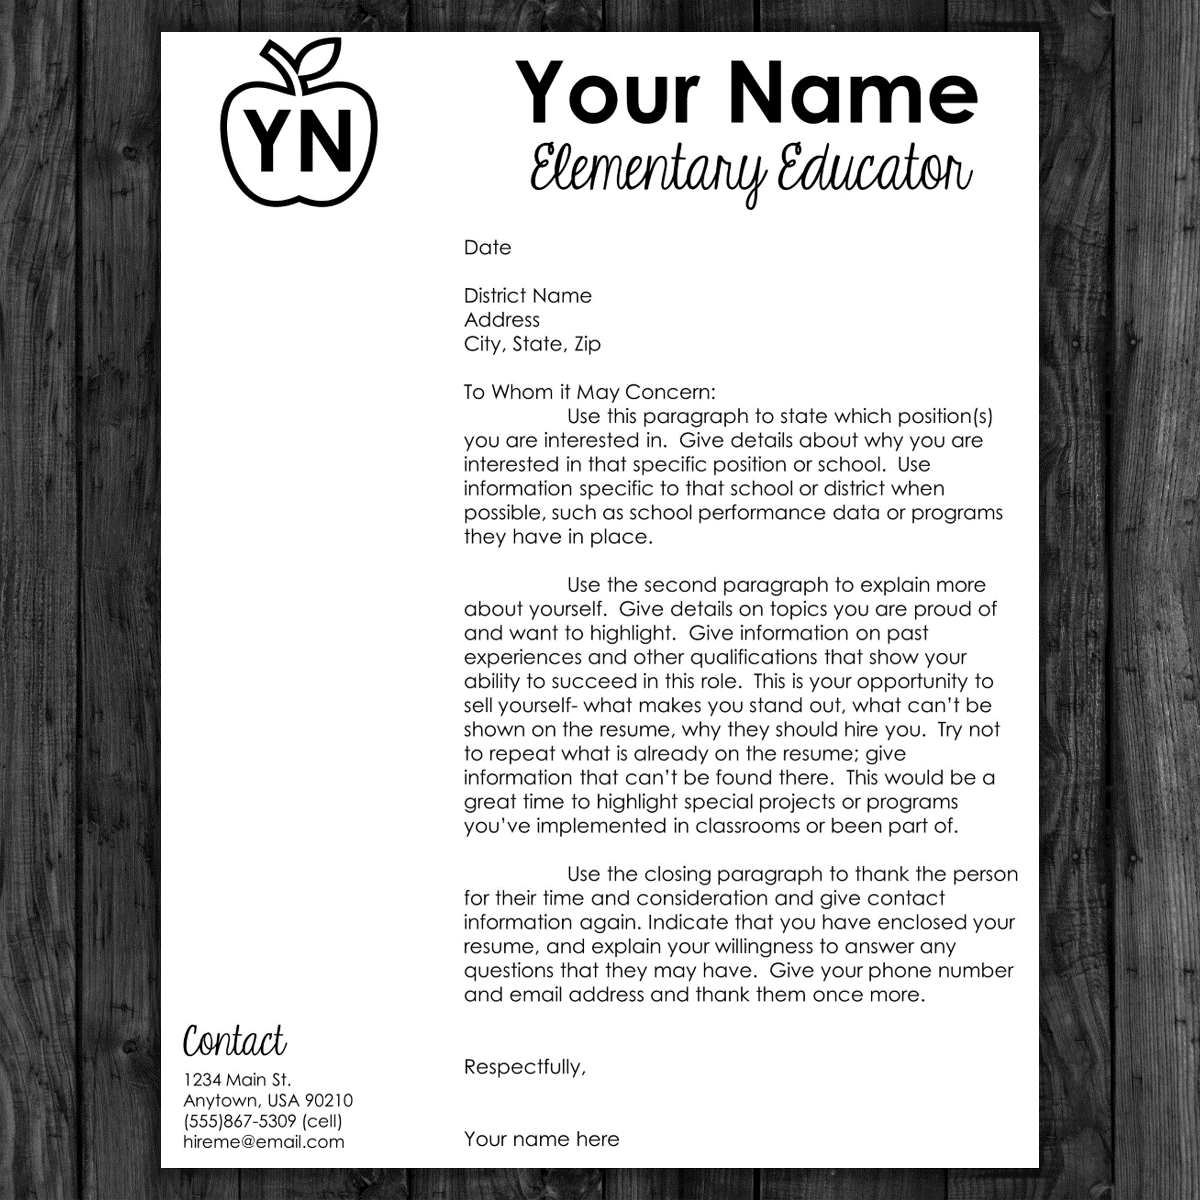 Teacher cover letter template on gray tabletop with sample name and text